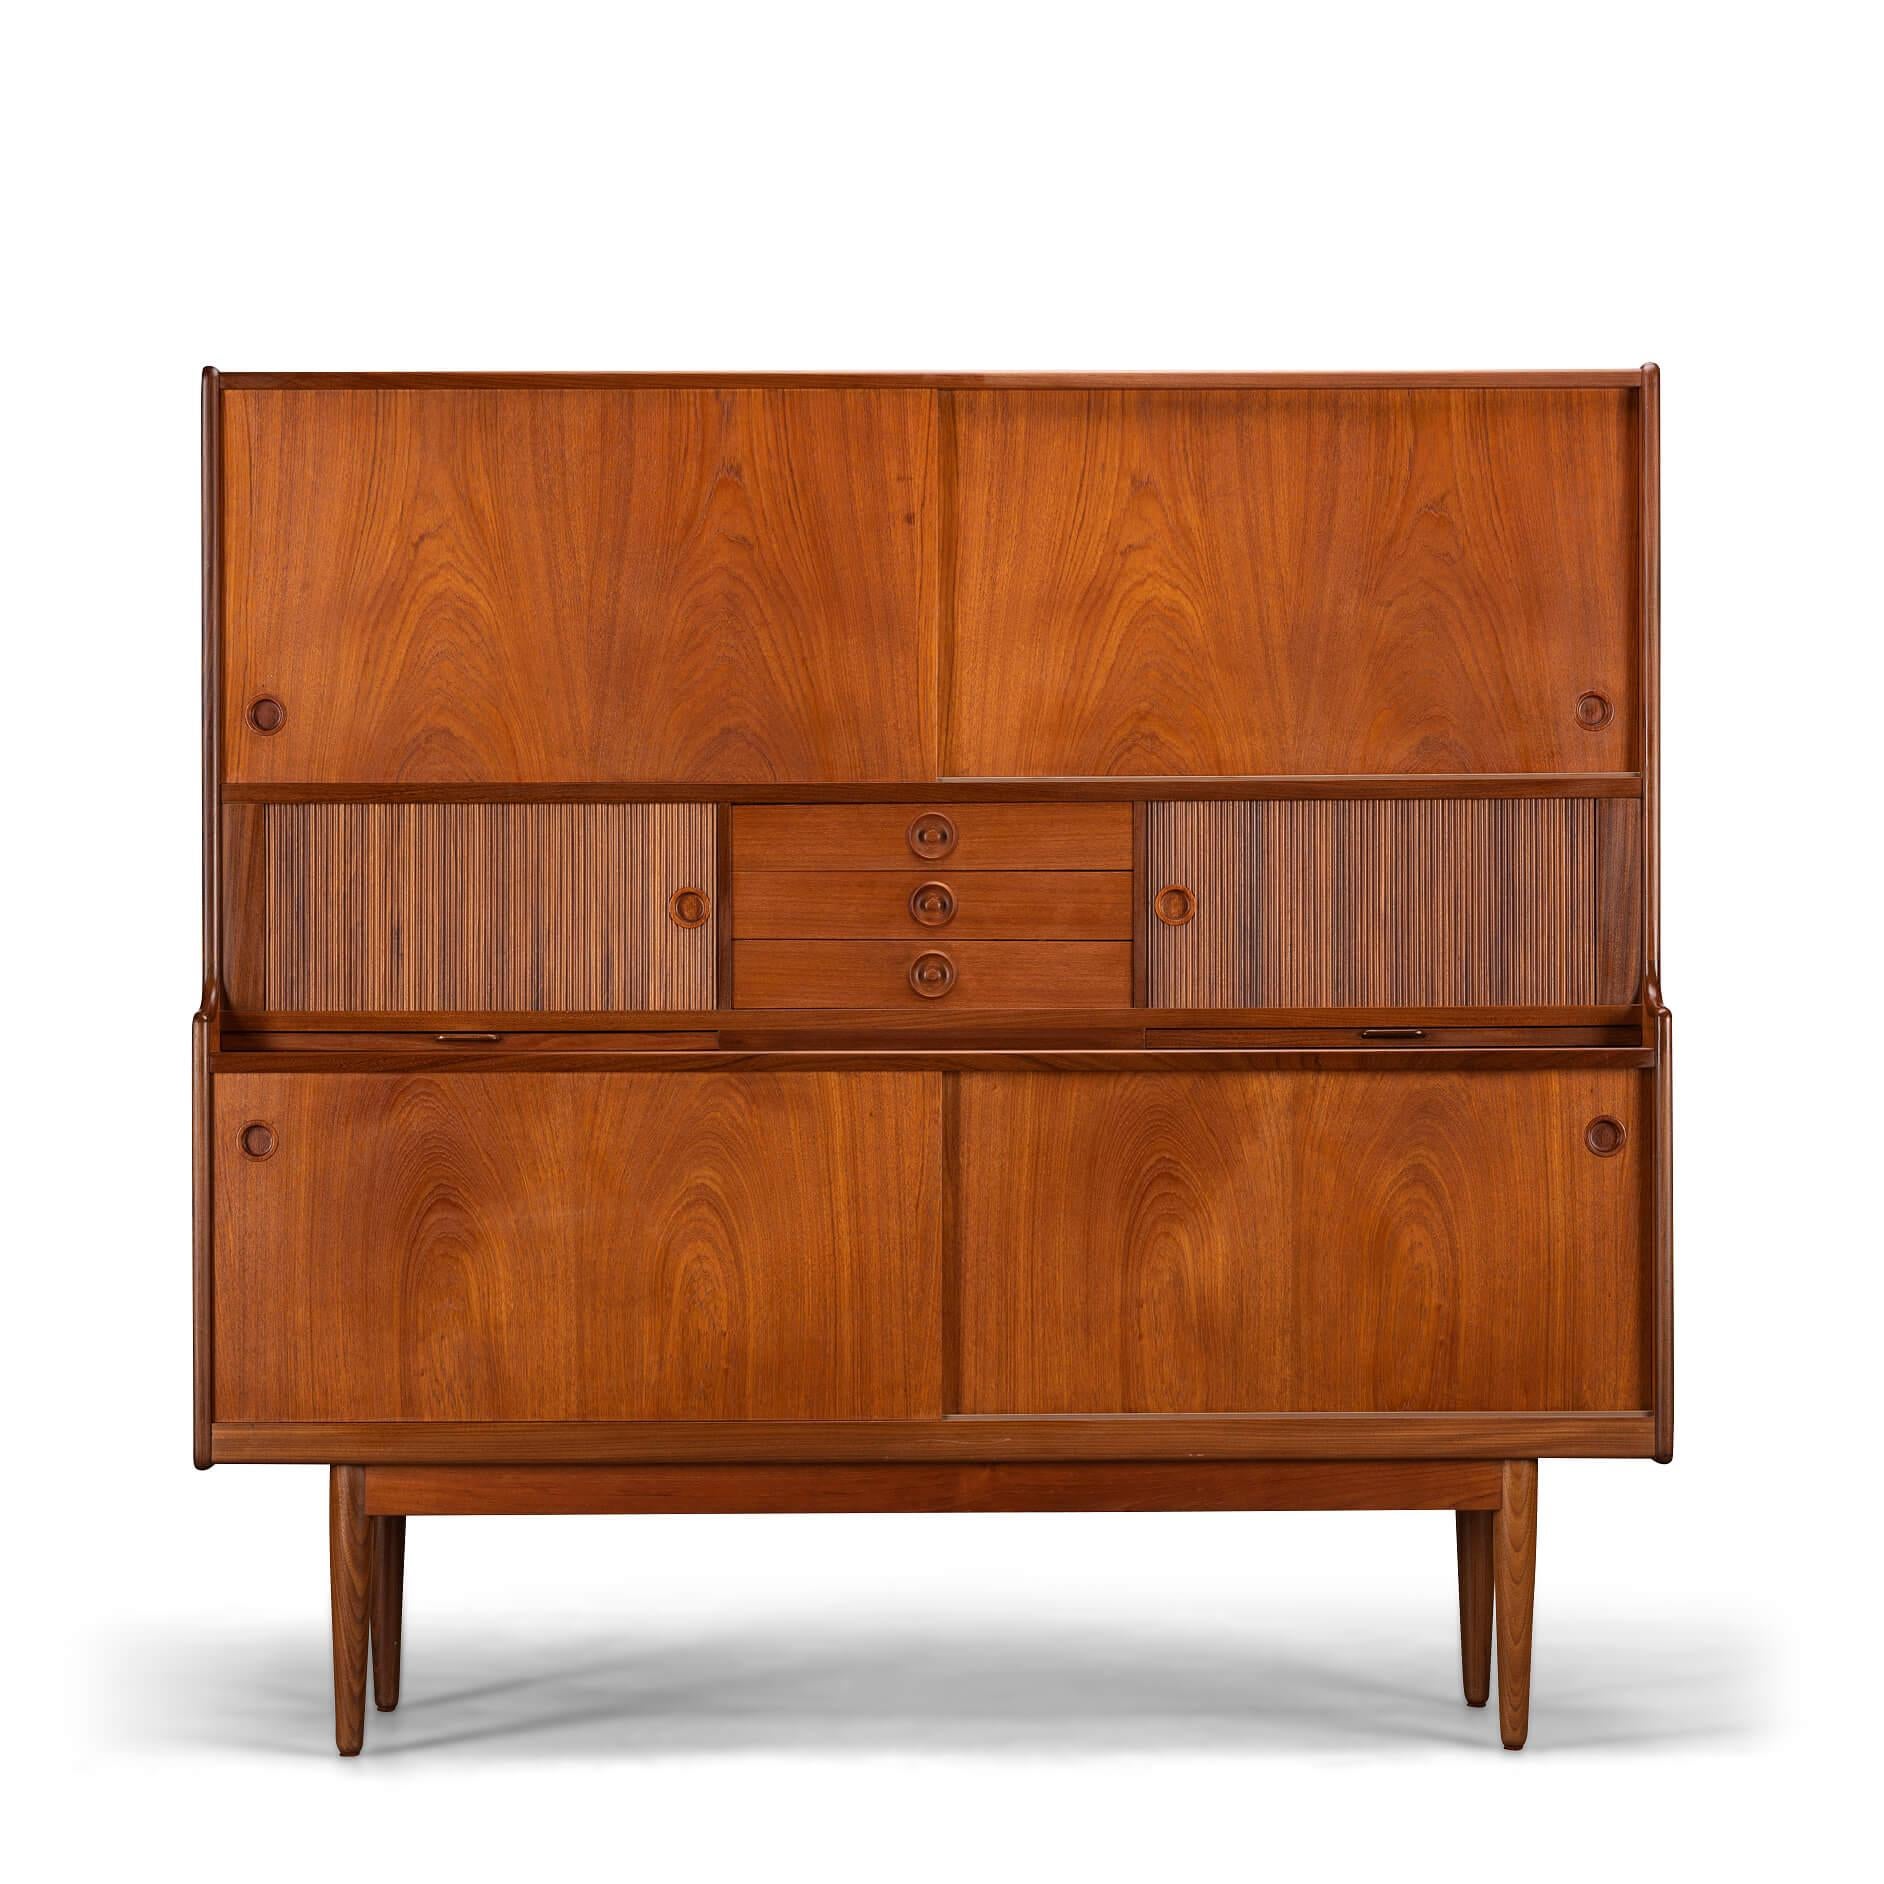 Storage Galore on this teak highboard made by J. Skaaning & Søn and designed by Johannes Andersen in the early 60s. It comes with all you covet in a vintage high board such as shelves, a glass lined and mirror equipped wopping bar section, pull out